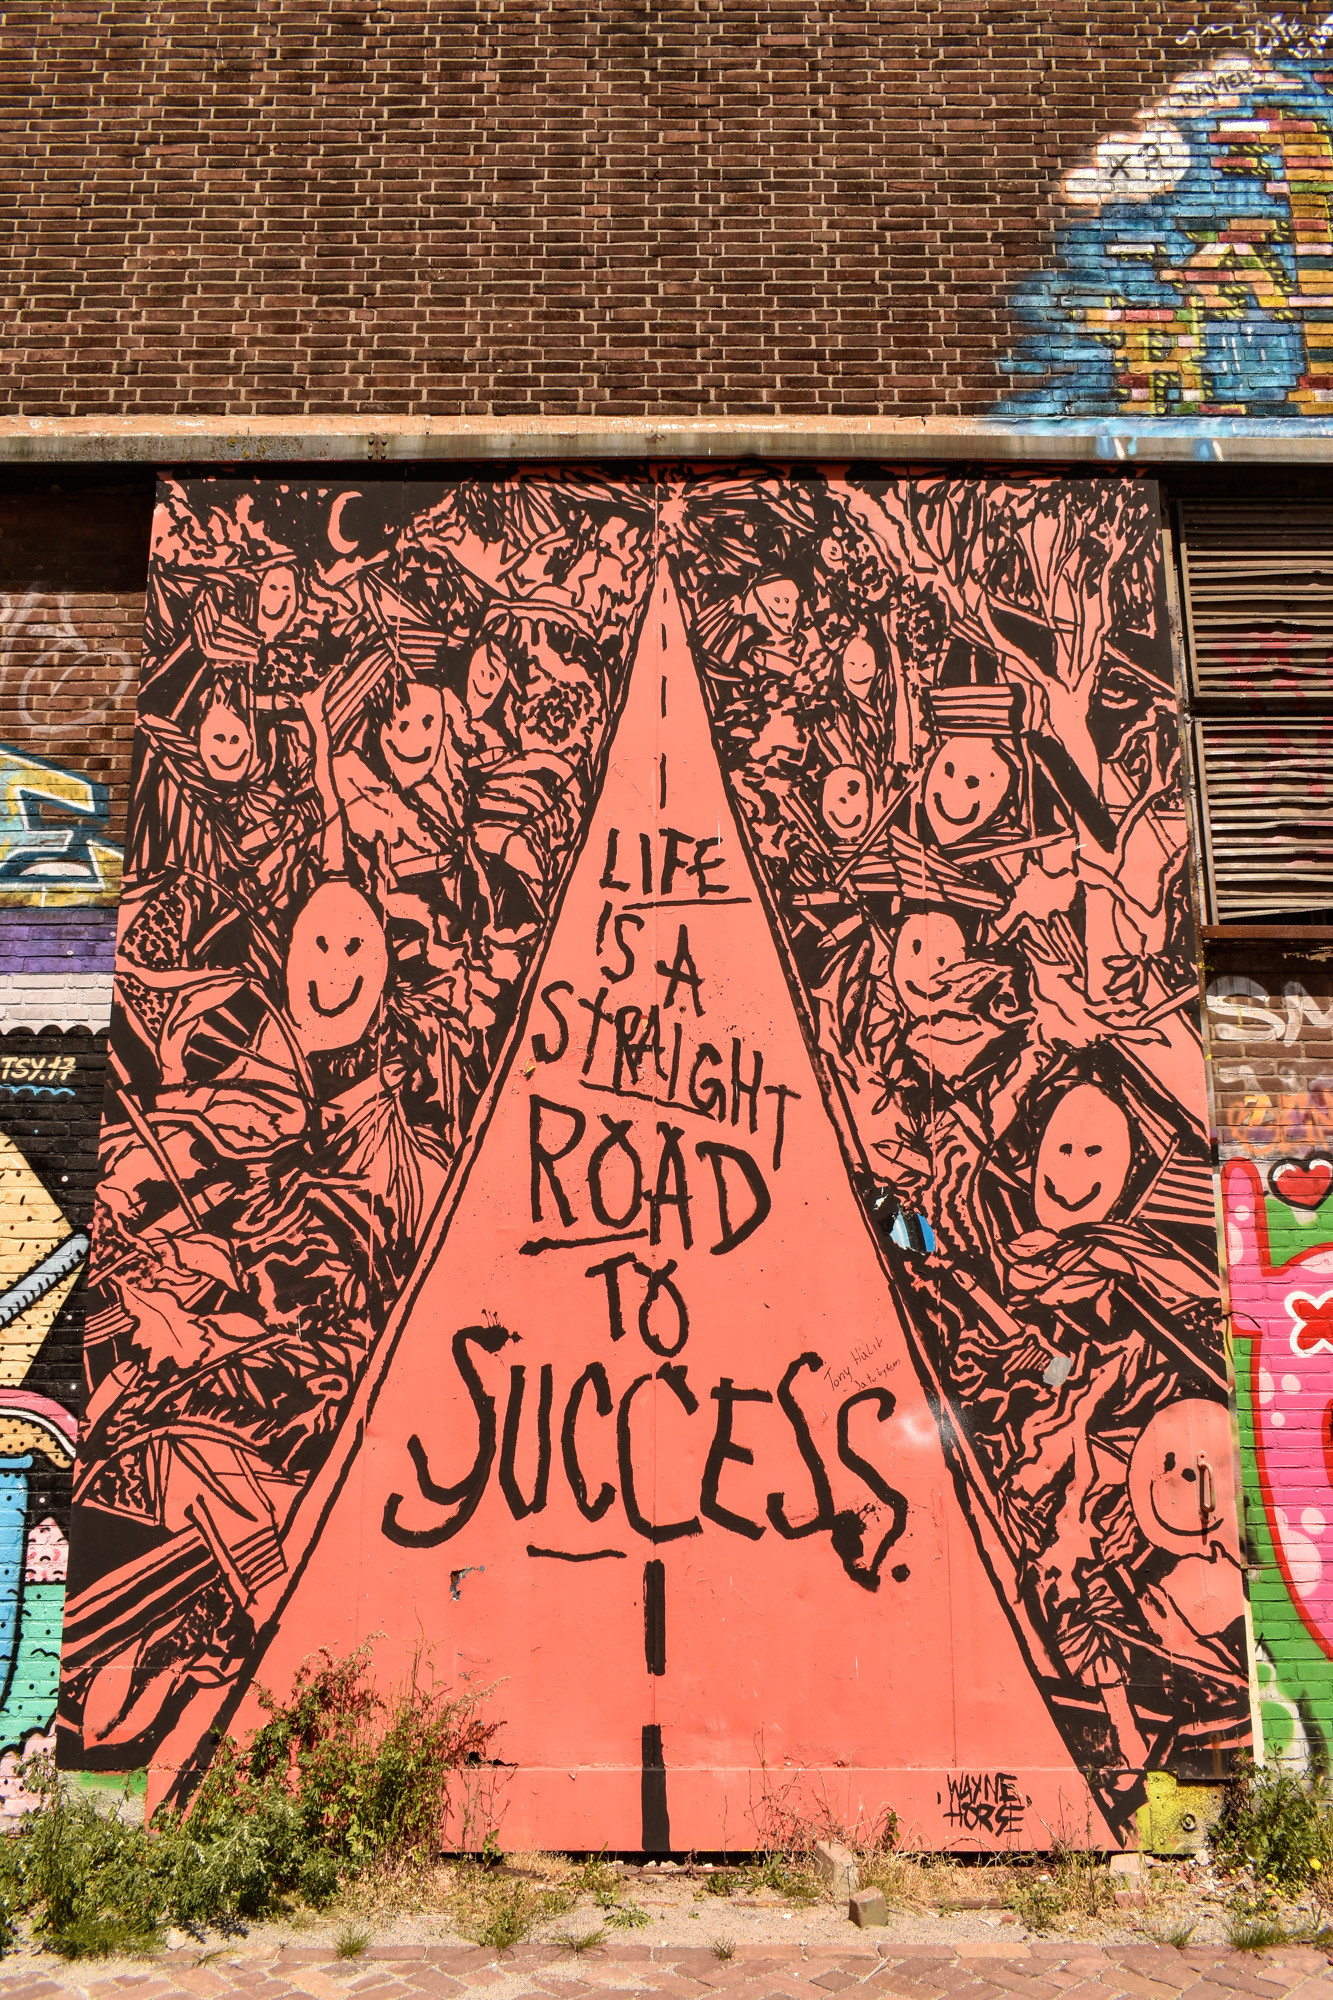 Life is a straight road to success street art Amsterdam